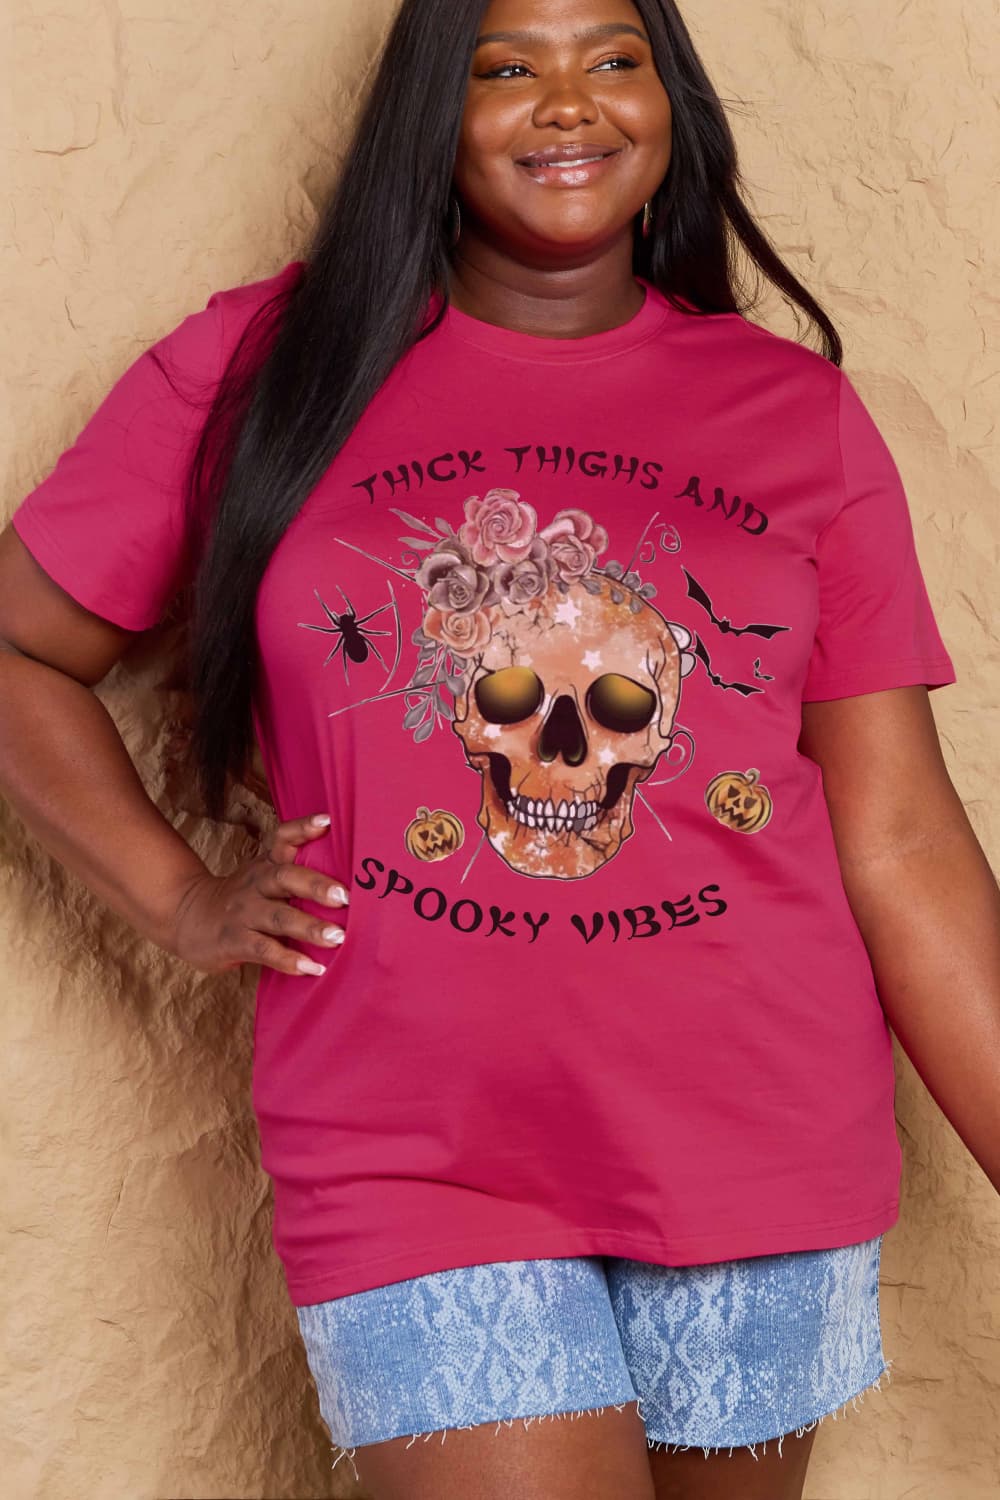 Simply Love Graphic T-shirts Deep Rose / S Full Size THICK THIGHS AND SPOOKY VIBES Graphic Cotton T-Shirt